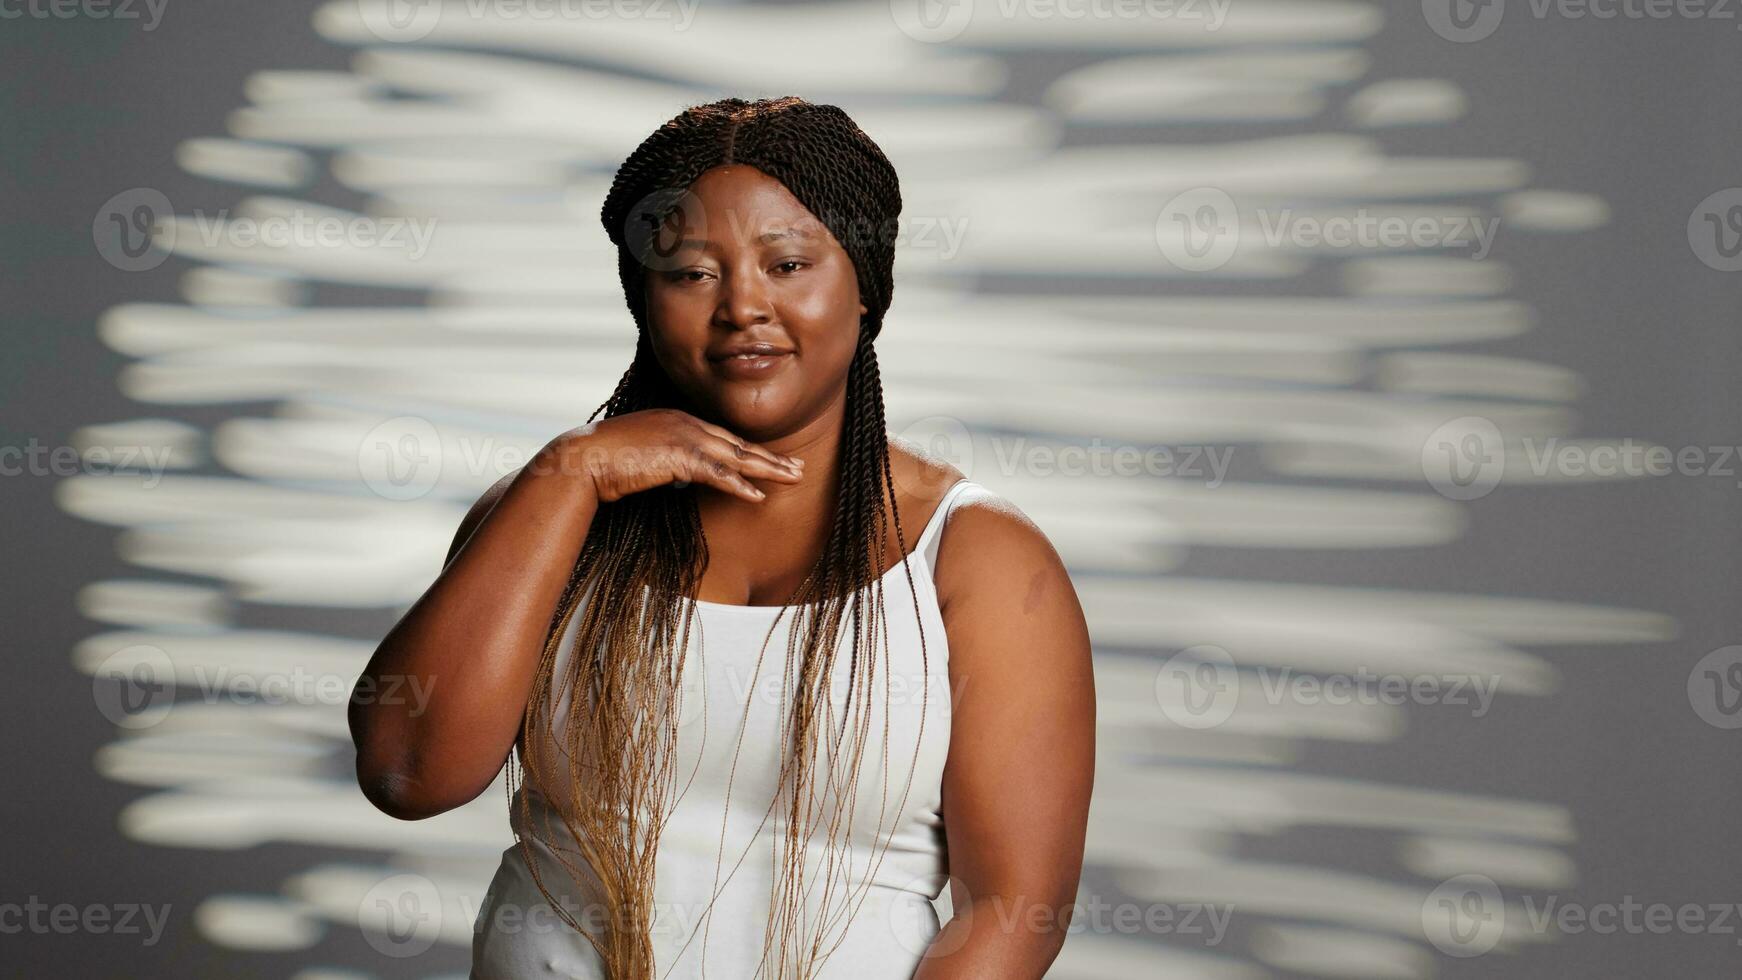 Young person embracing imperfections on camera, posing for empowering skincare ad campaign. Positive gentle woman with natural radiant skin feeling confident with body and skintone. photo